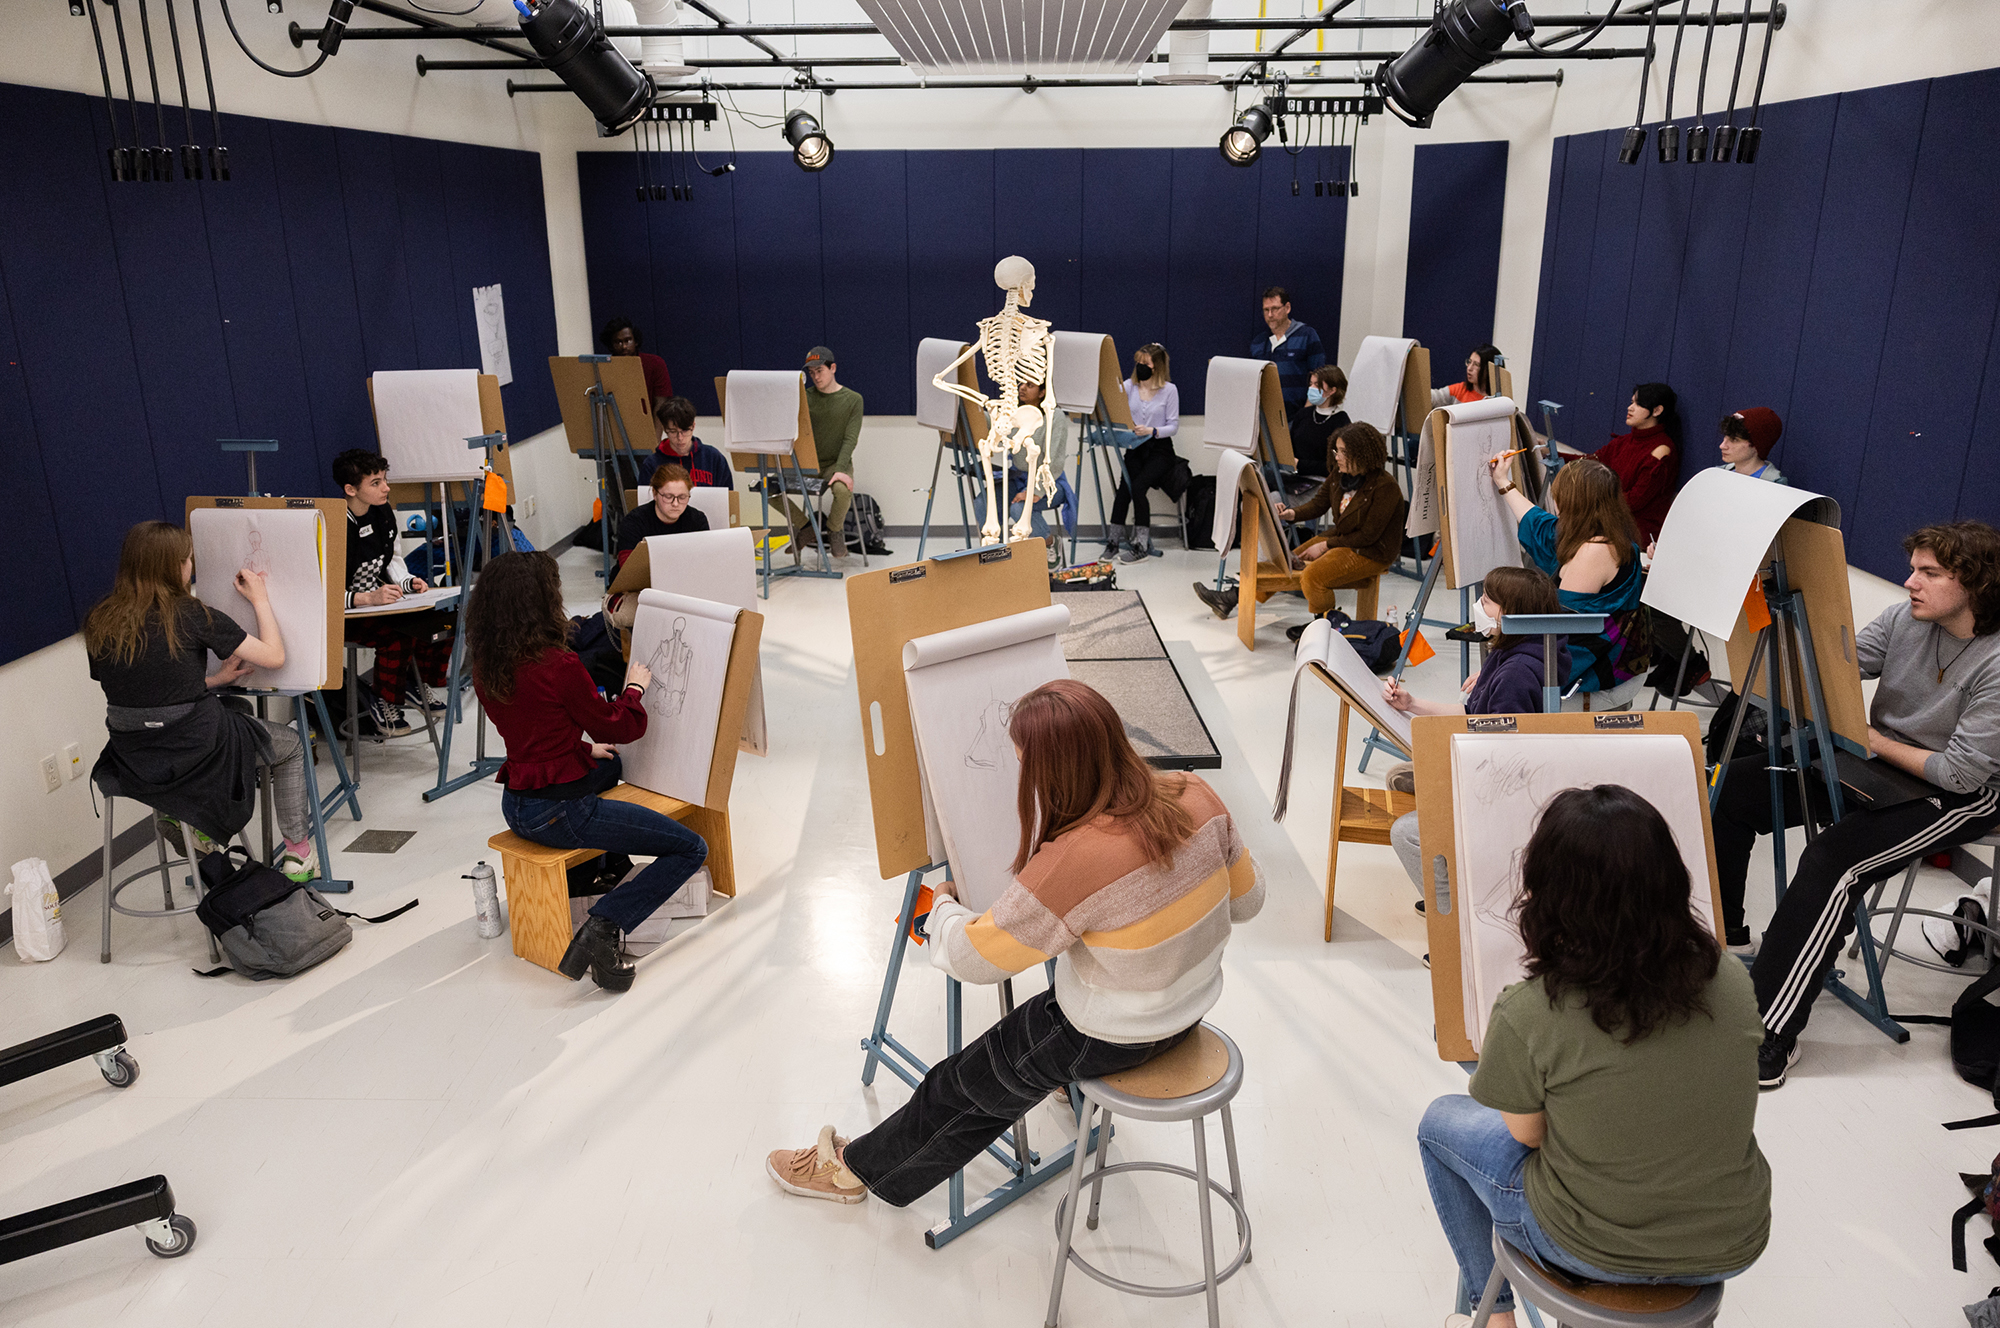 An expansive view of an animation drawing studio in which students are drawing on easels.